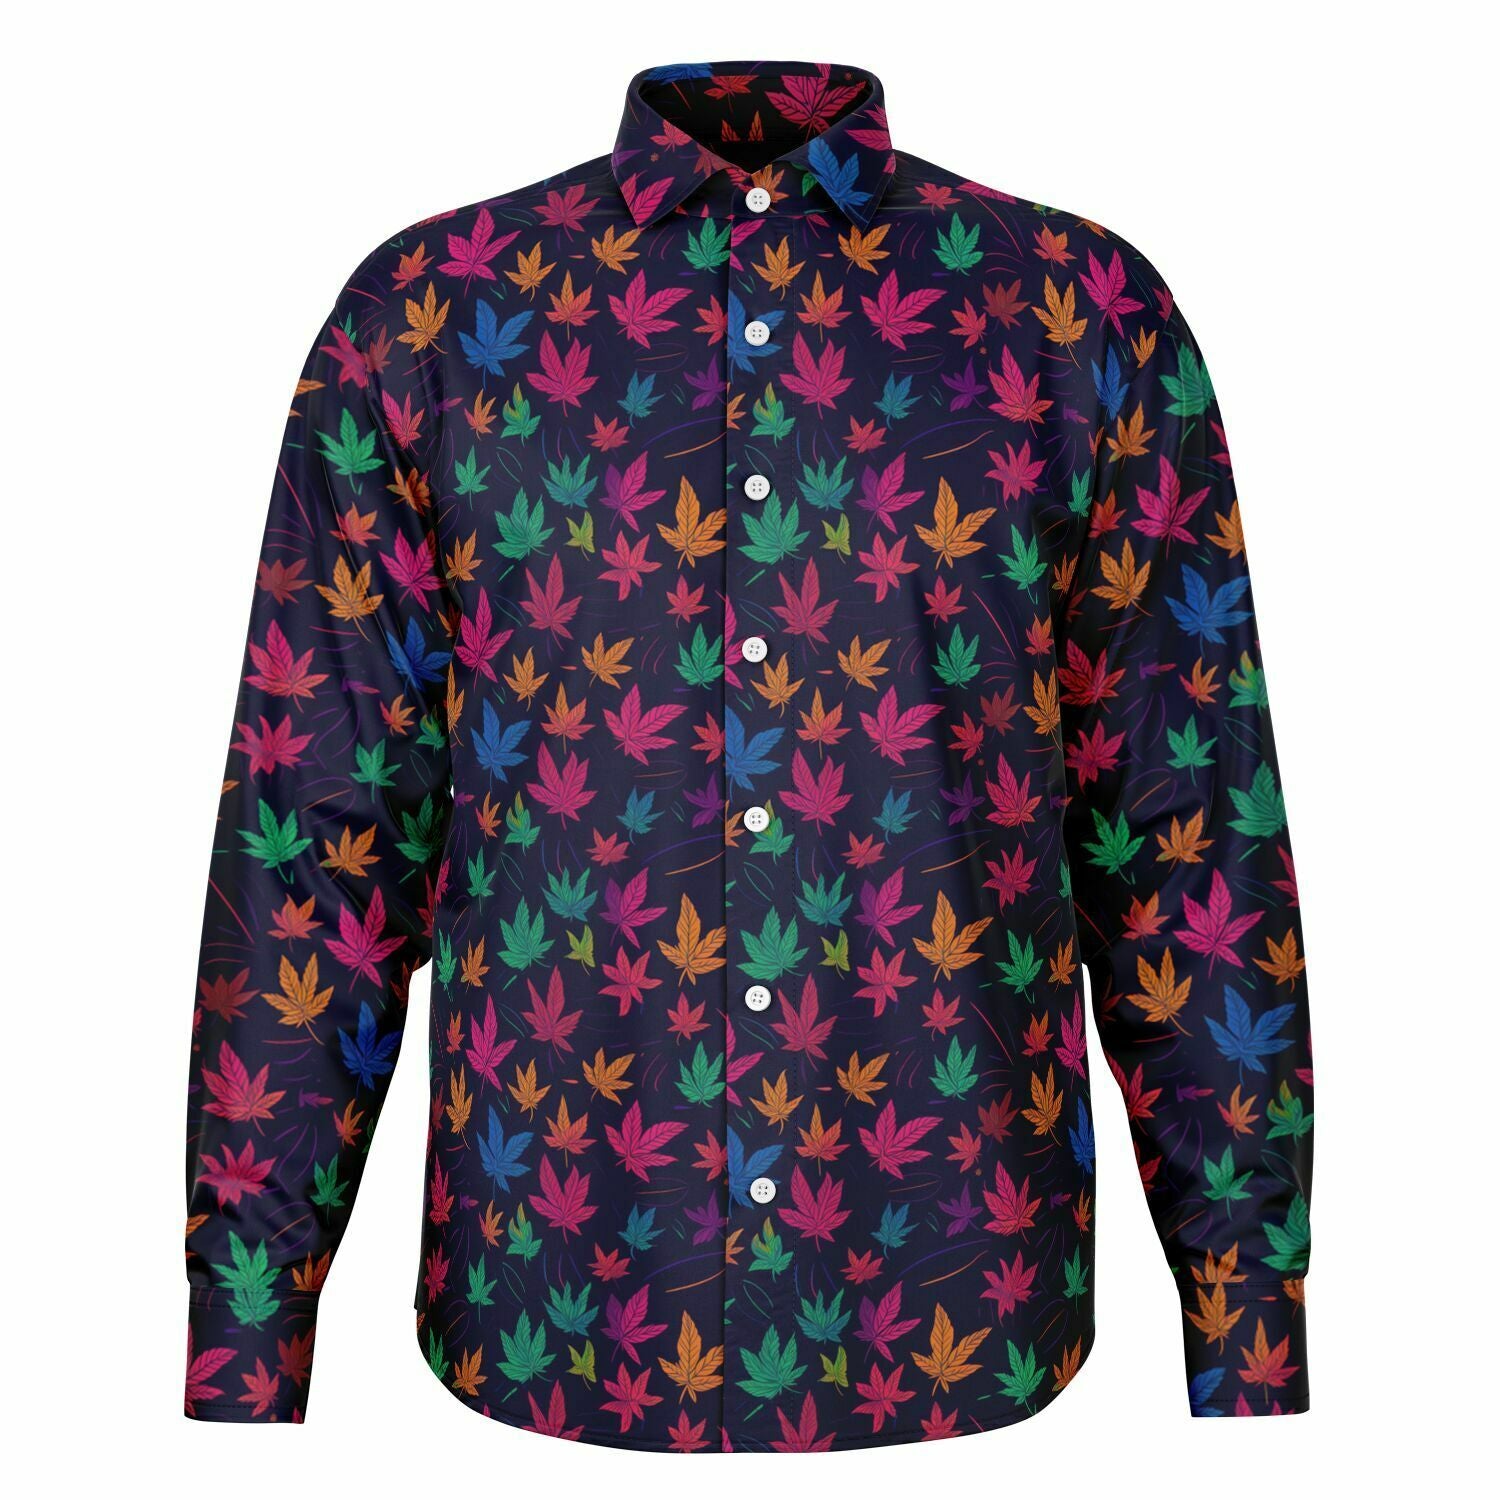 Chemise homme manches longues - "Cannabis style"